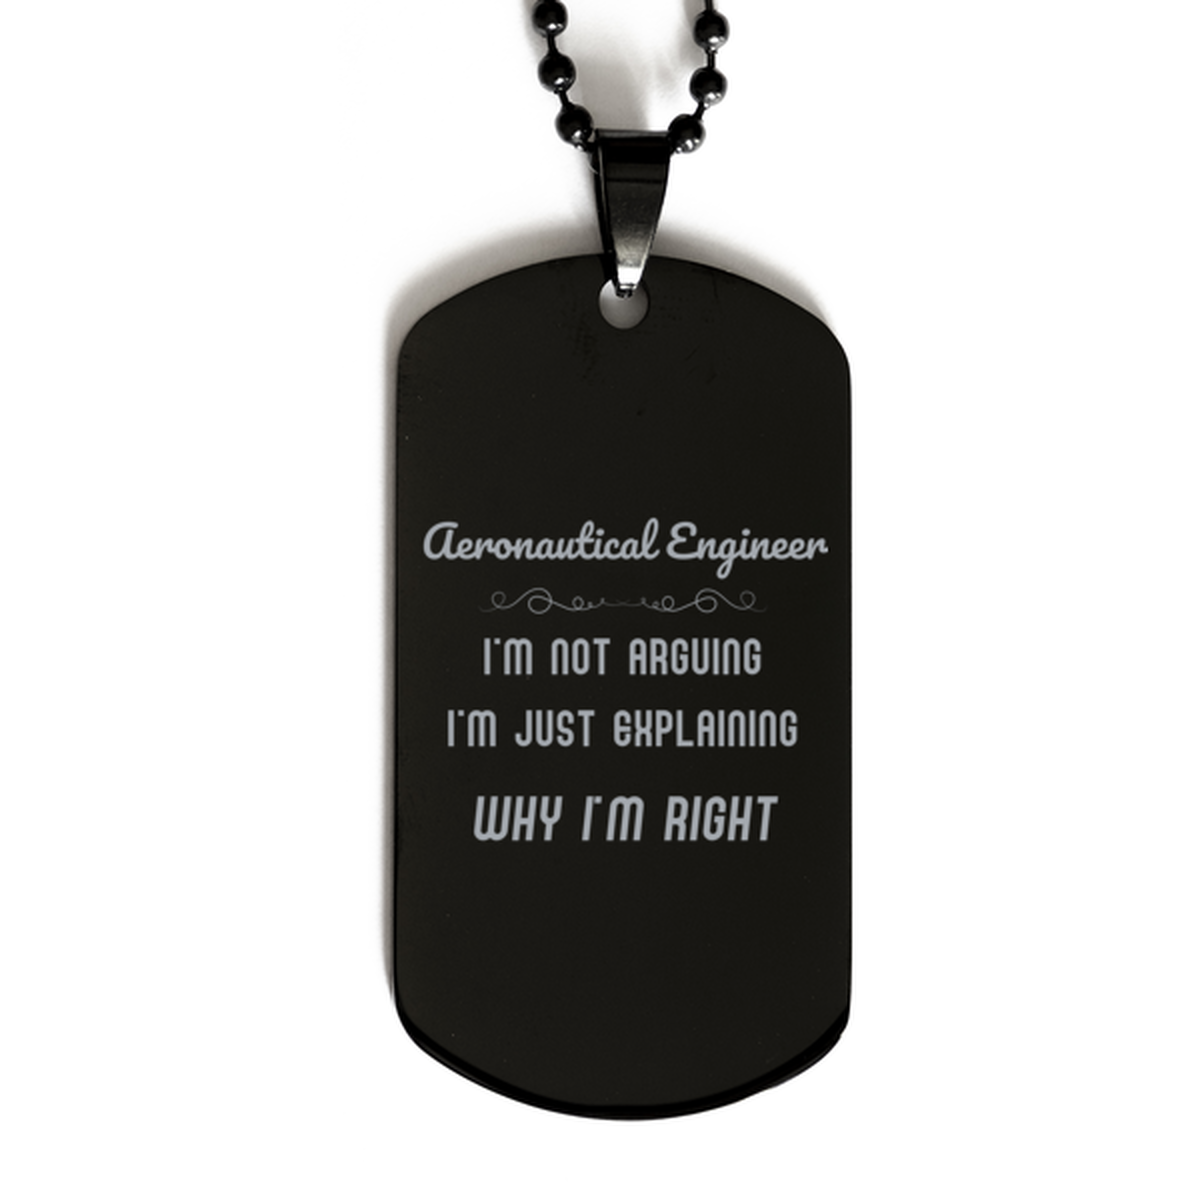 Aeronautical Engineer I'm not Arguing. I'm Just Explaining Why I'm RIGHT Black Dog Tag, Funny Saying Quote Aeronautical Engineer Gifts For Aeronautical Engineer Graduation Birthday Christmas Gifts for Men Women Coworker